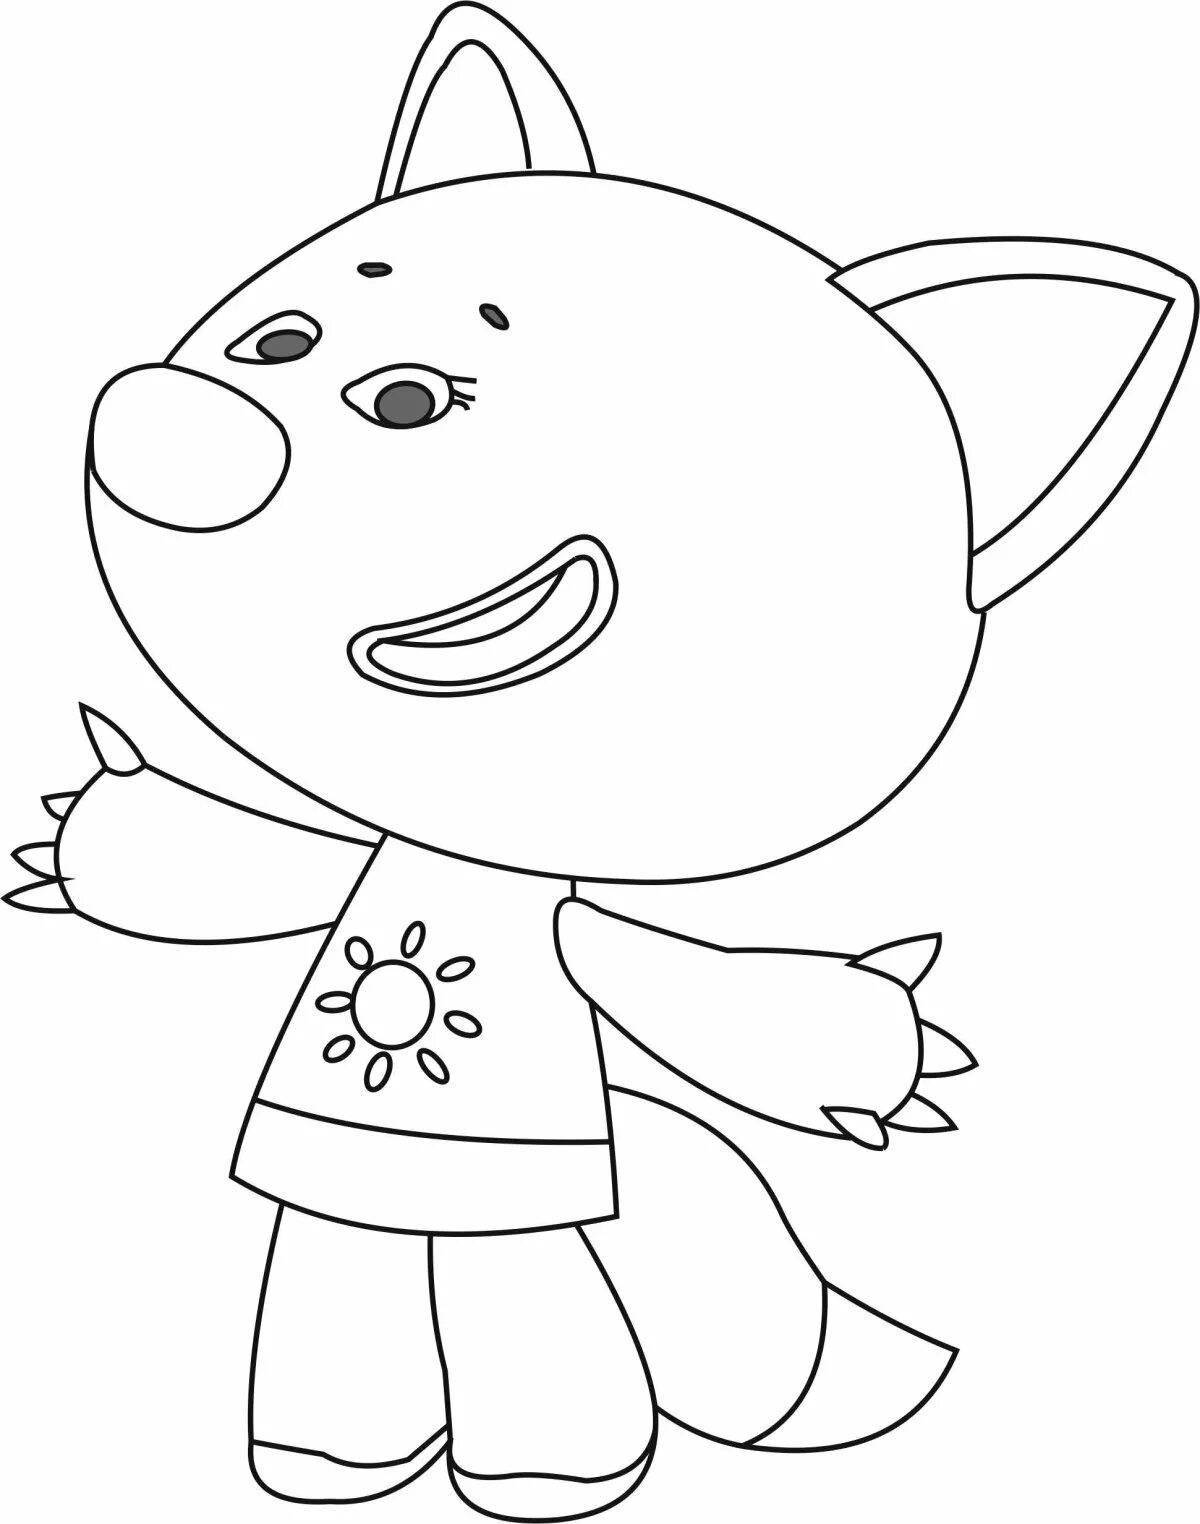 Mimimishka funny coloring pages for kids